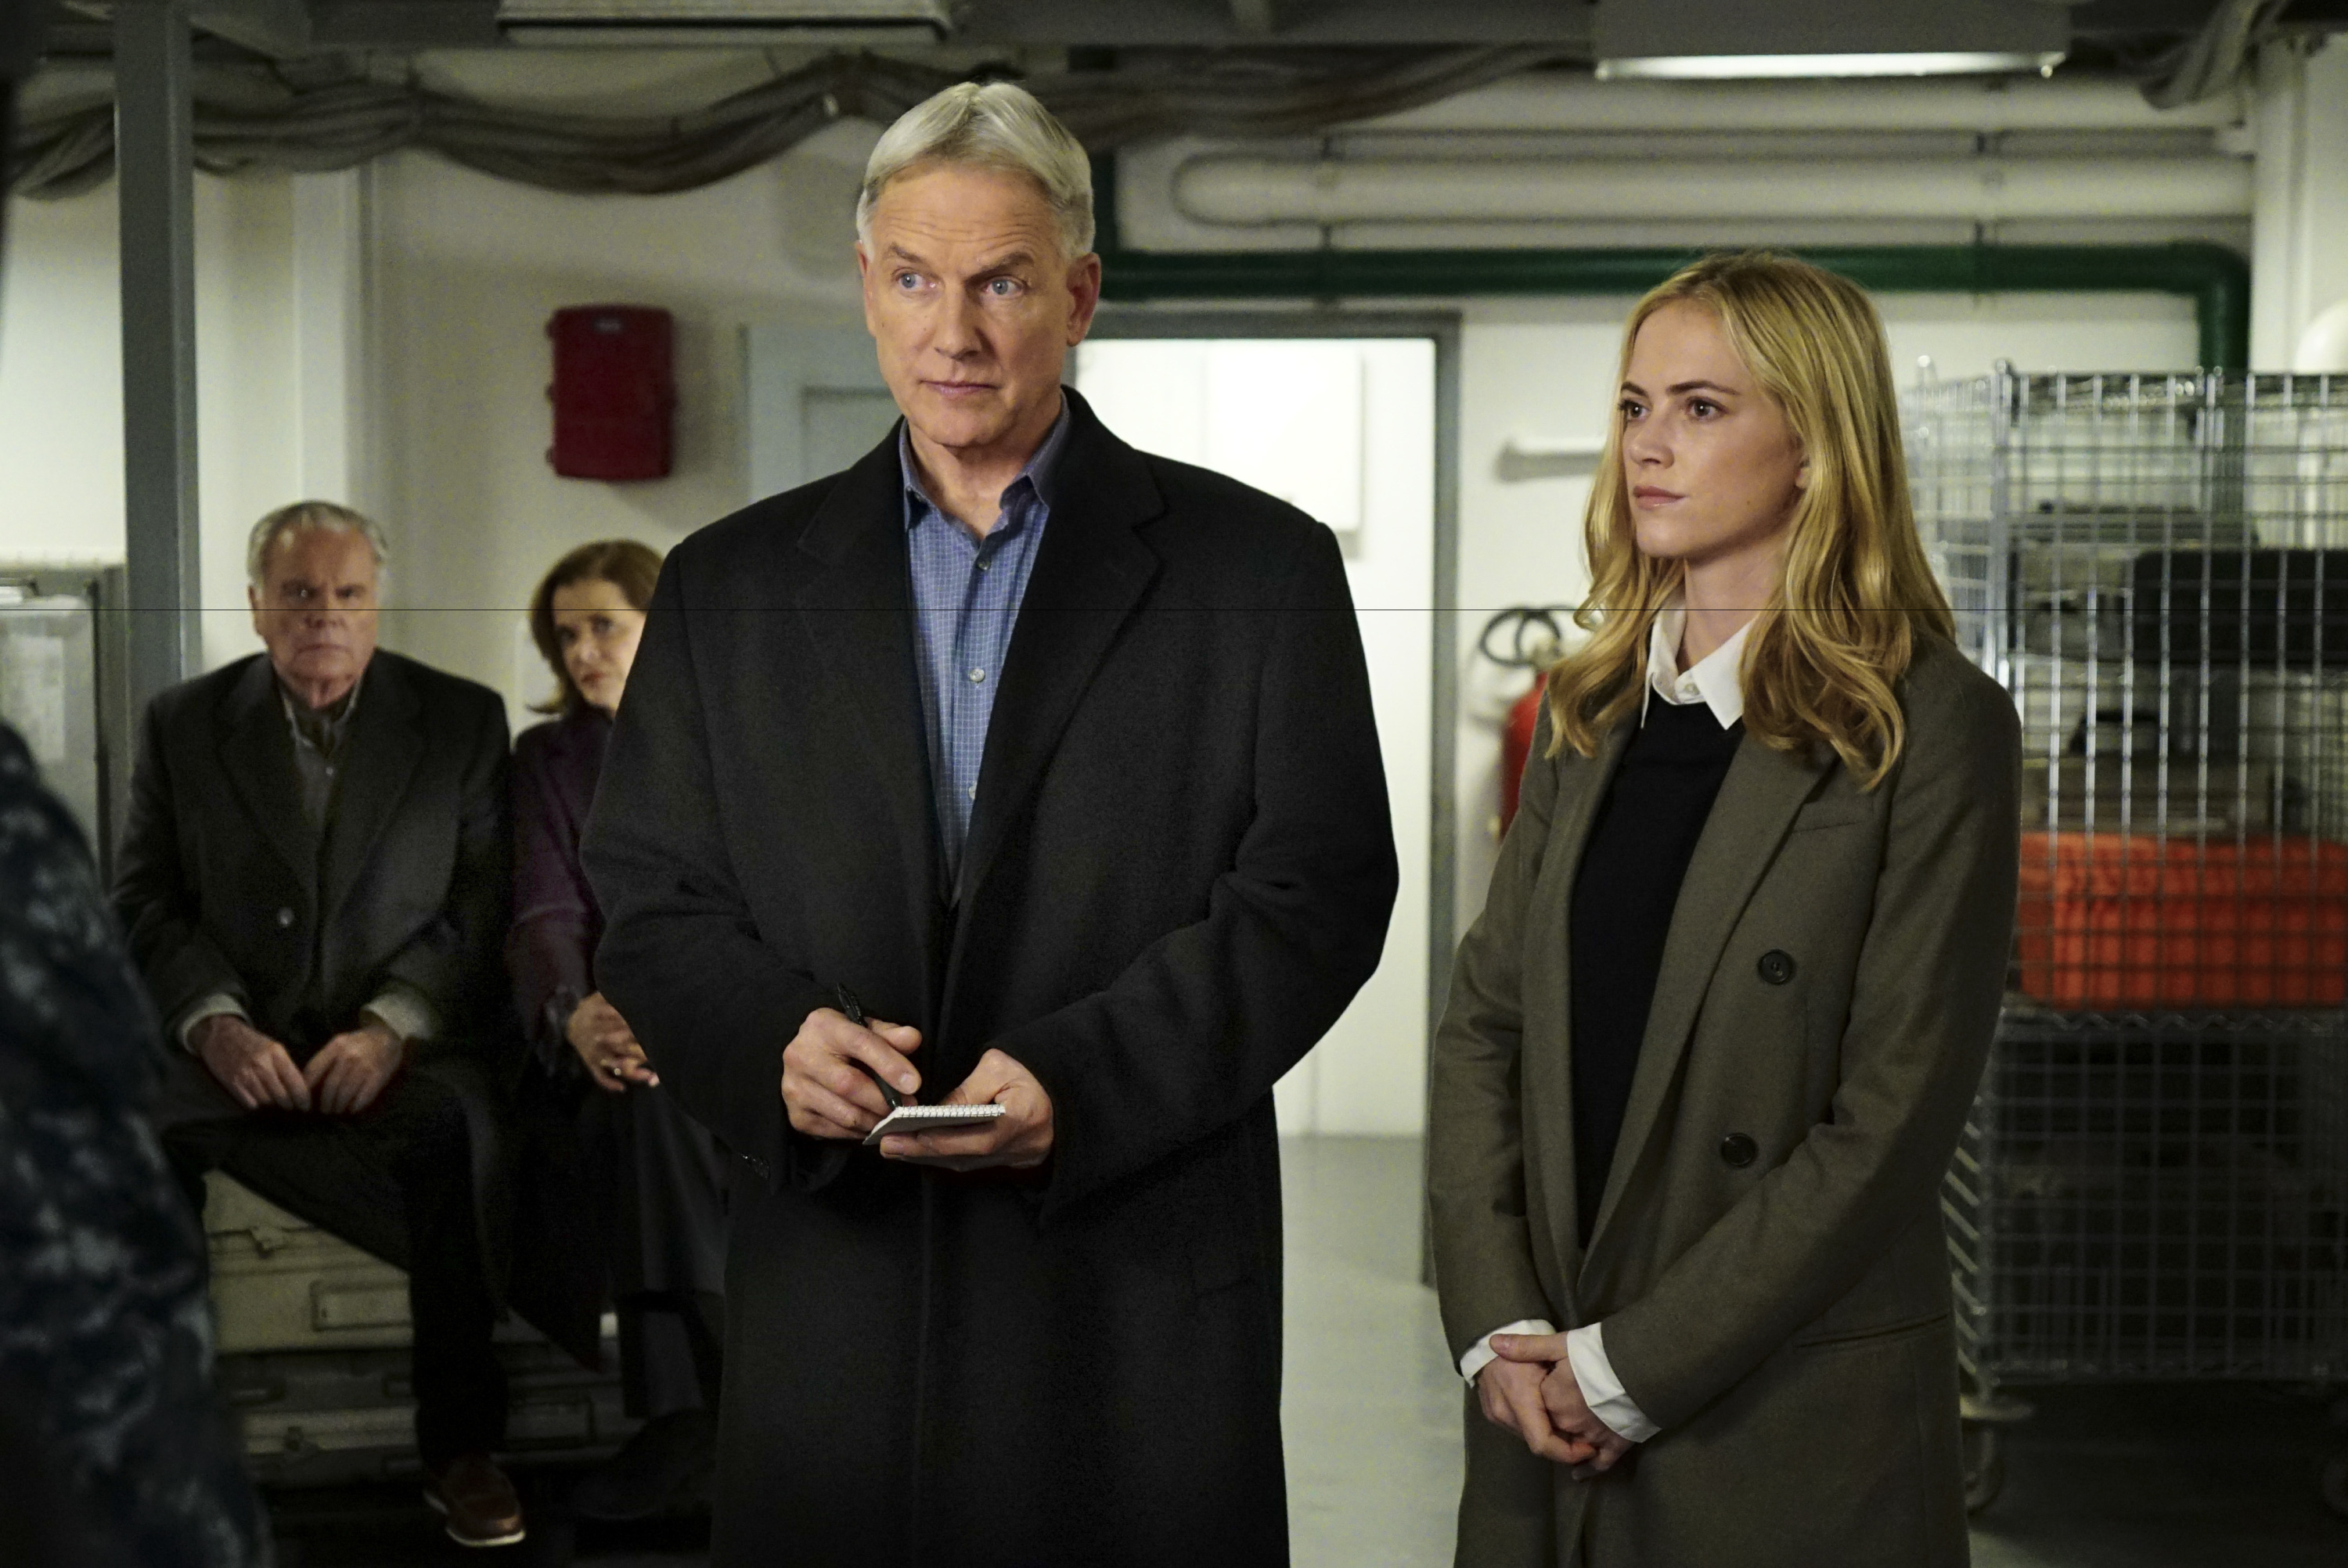 Mark Harmon and Emily Wickersham on an episode of "NCIS" on December 12, 2016 | Source: Getty Images